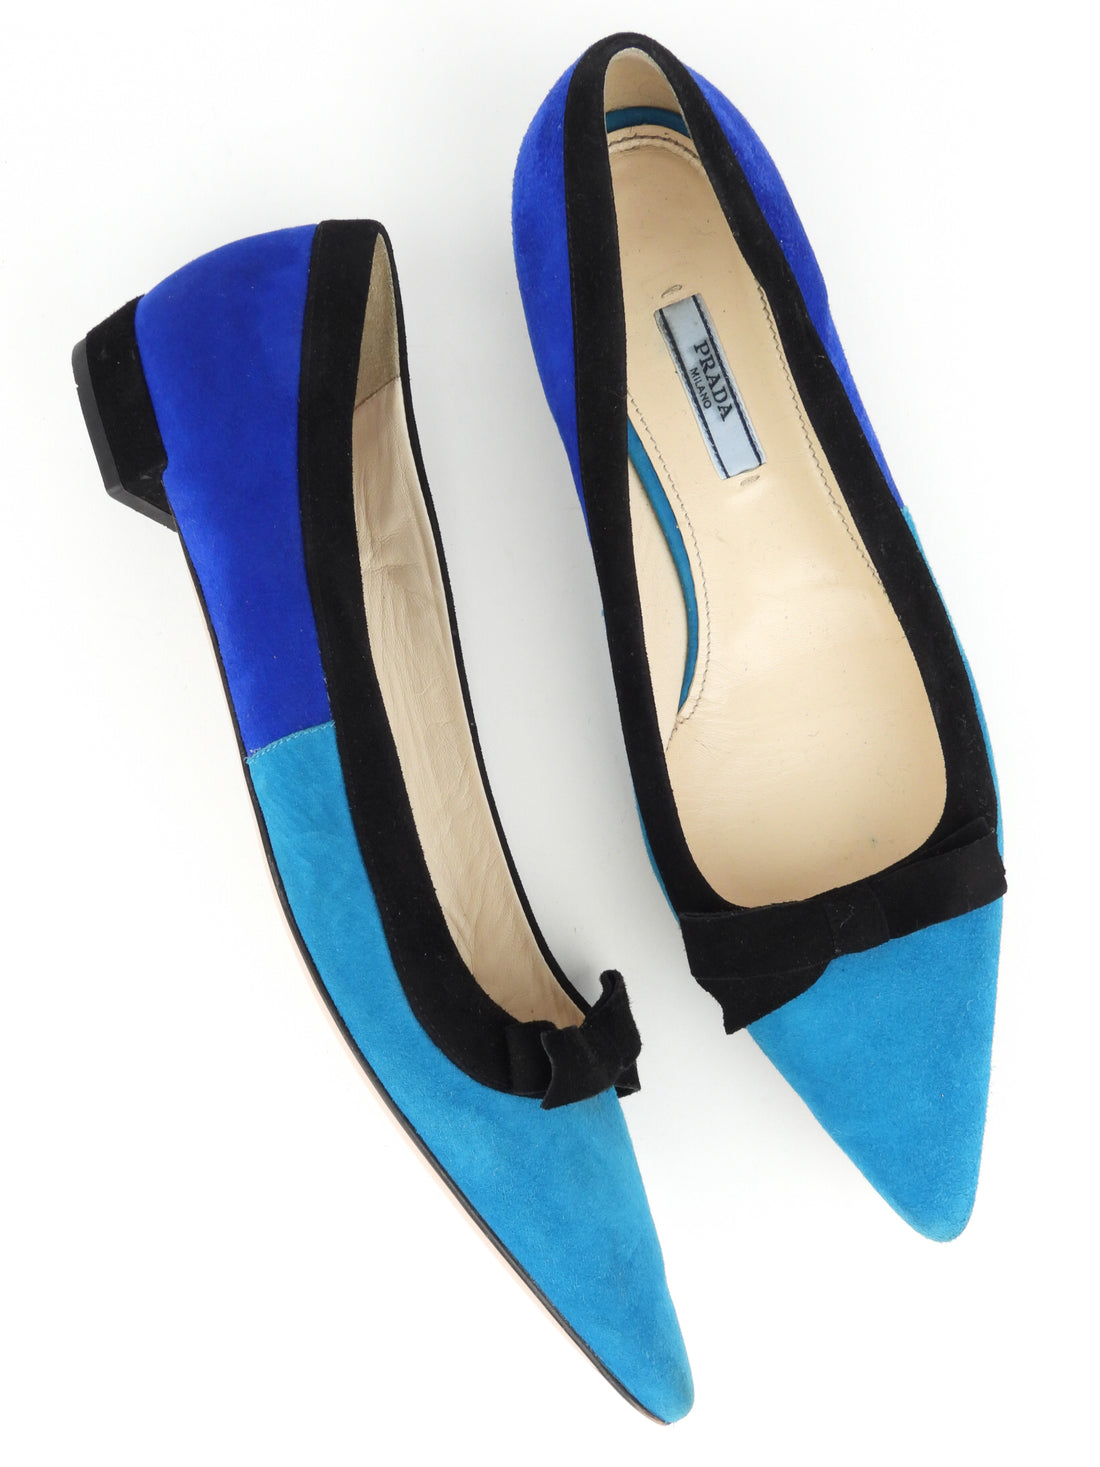 Prada Blue and Black Suede Leather Pointy Toe Flats - 39.5